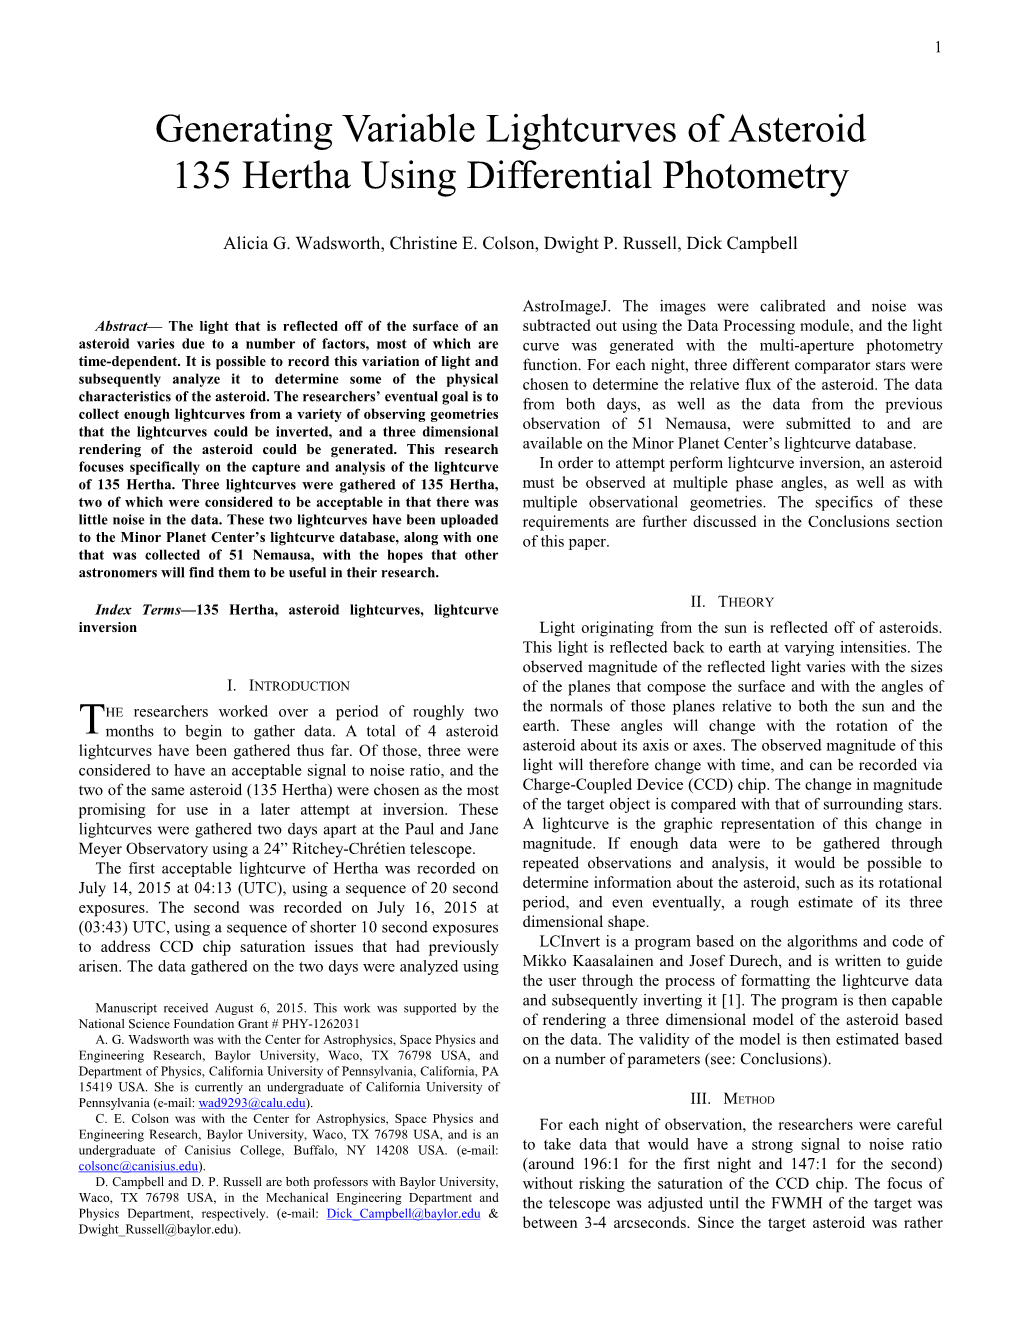 Generating Variable Lightcurves of Asteroid 135 Hertha Using Differential Photometry